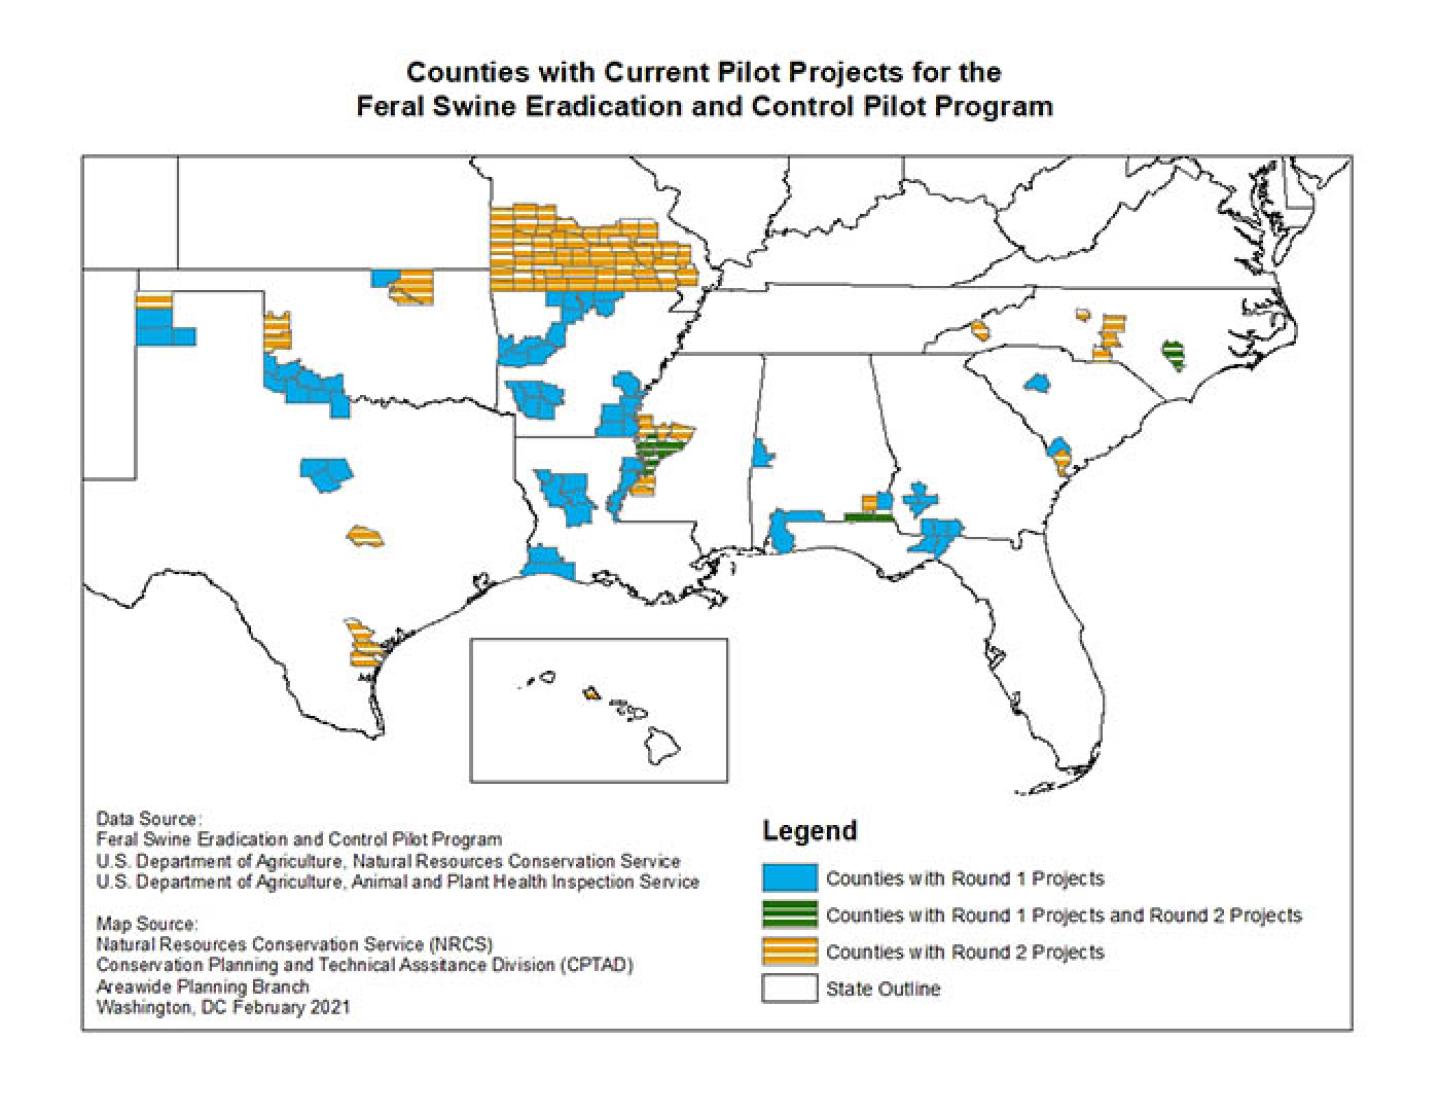 Thumbnail of Counties with Current Feral Swine Eradication and Control Pilot Program Pilot Projects map